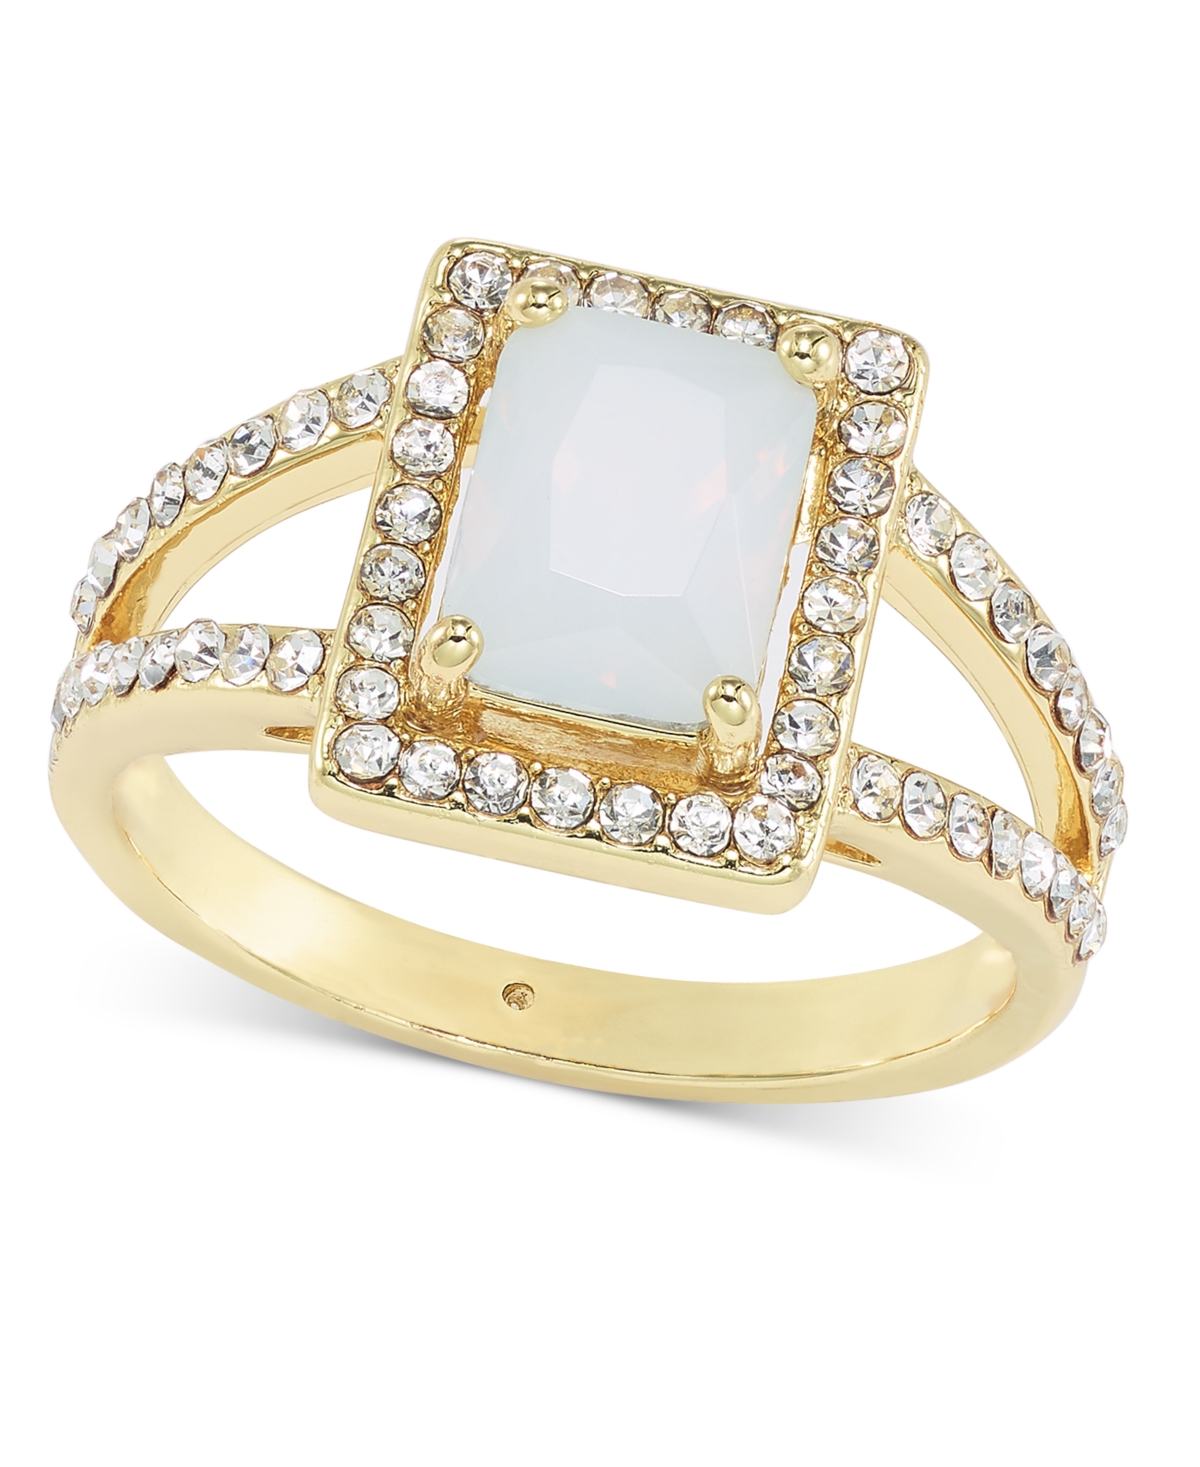 Gold-Tone Pave & White Crystal Split Band Ring, Created for Macy's - Gold